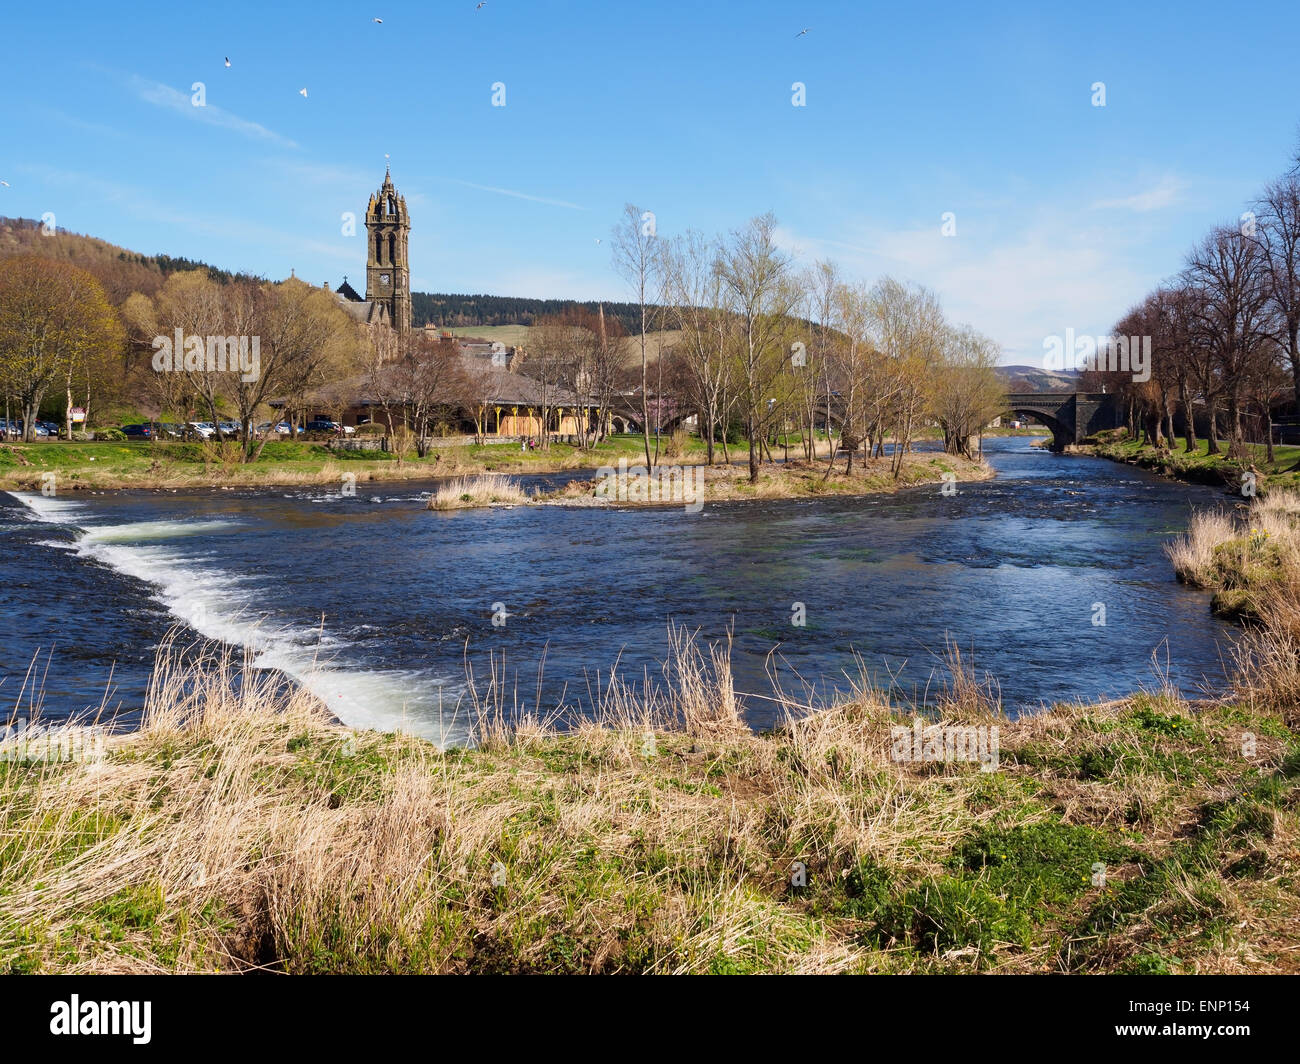 The town of Peebles in the Scottish Borders, and the River Tweed. Stock Photo